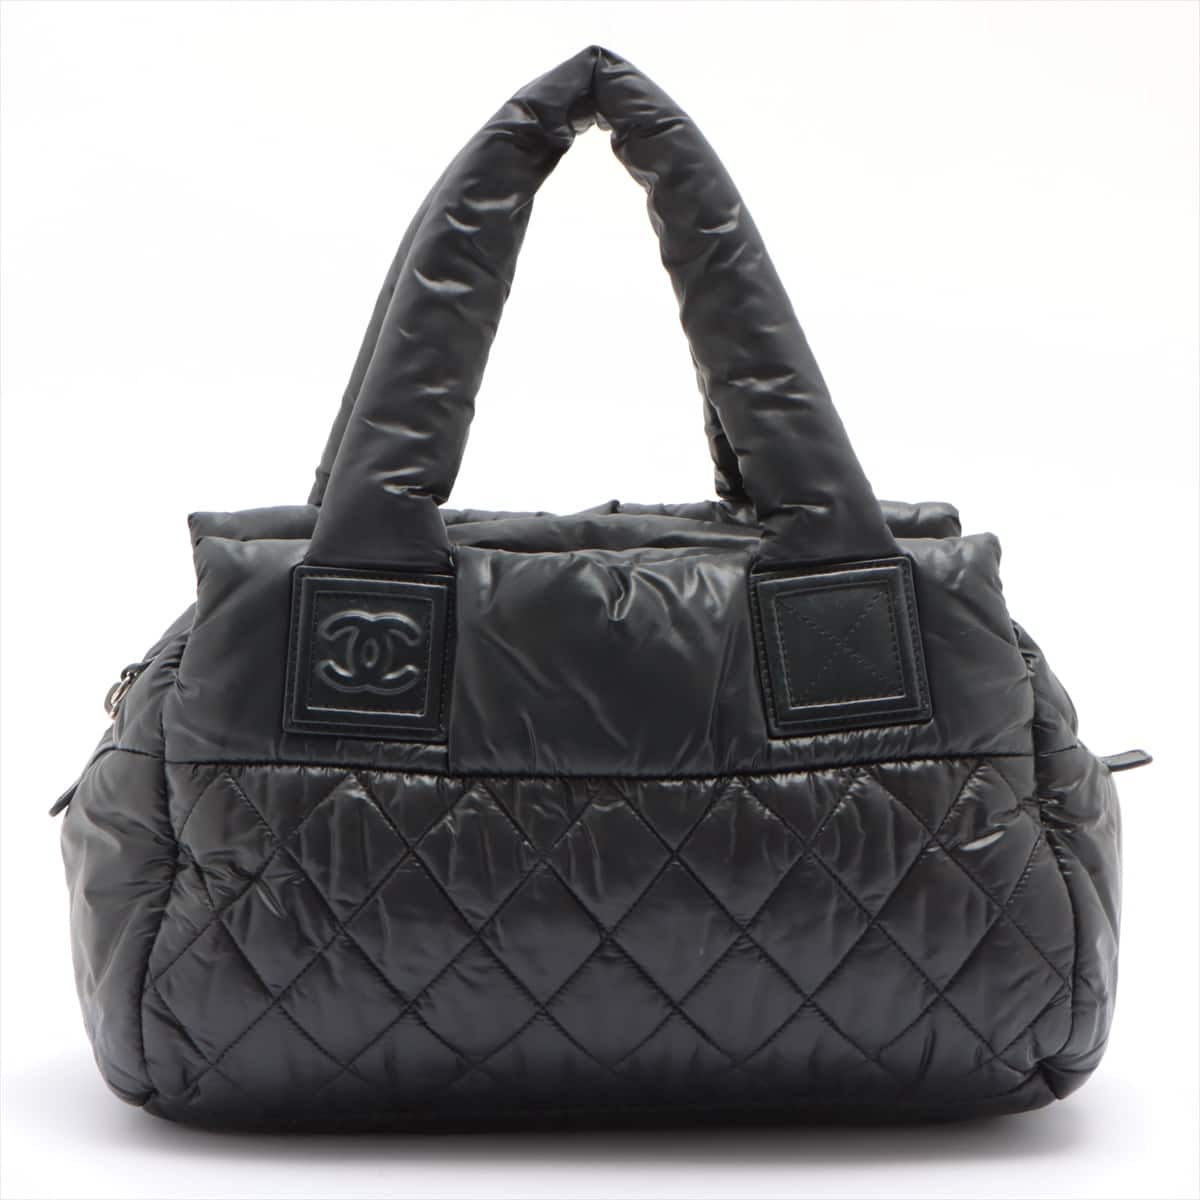 Chanel Coco Cocoon Nylon Hand bag Black Silver Metal fittings 16XXXXXX